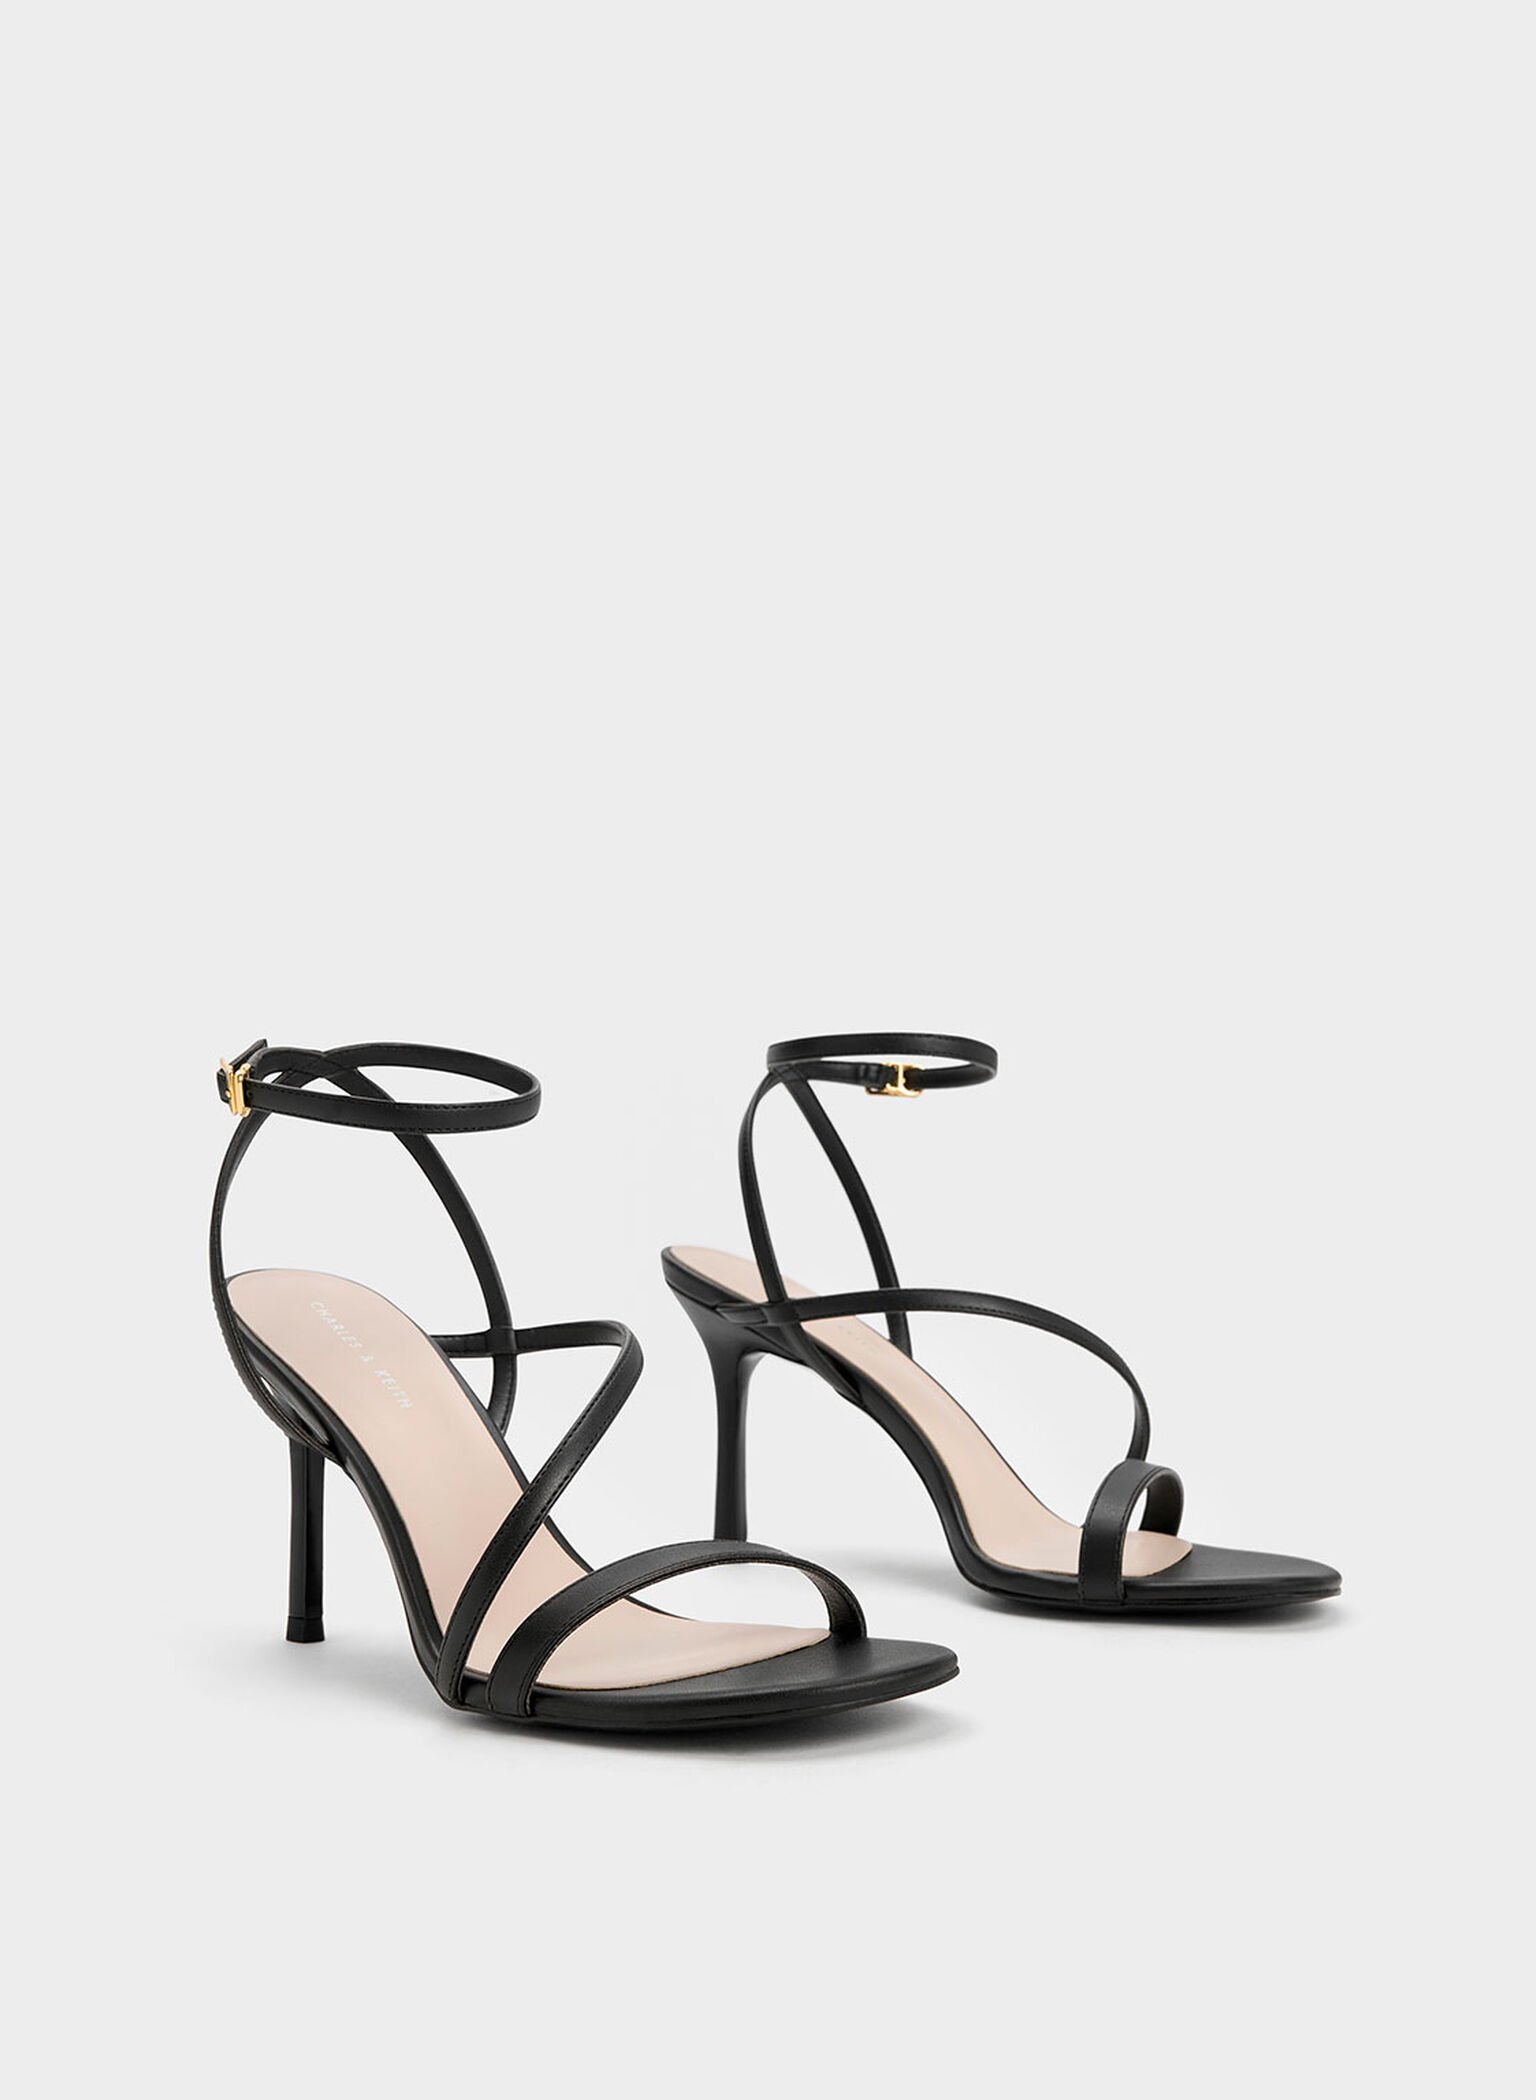 Black Asymmetric Strappy Heeled Sandals - CHARLES & KEITH US